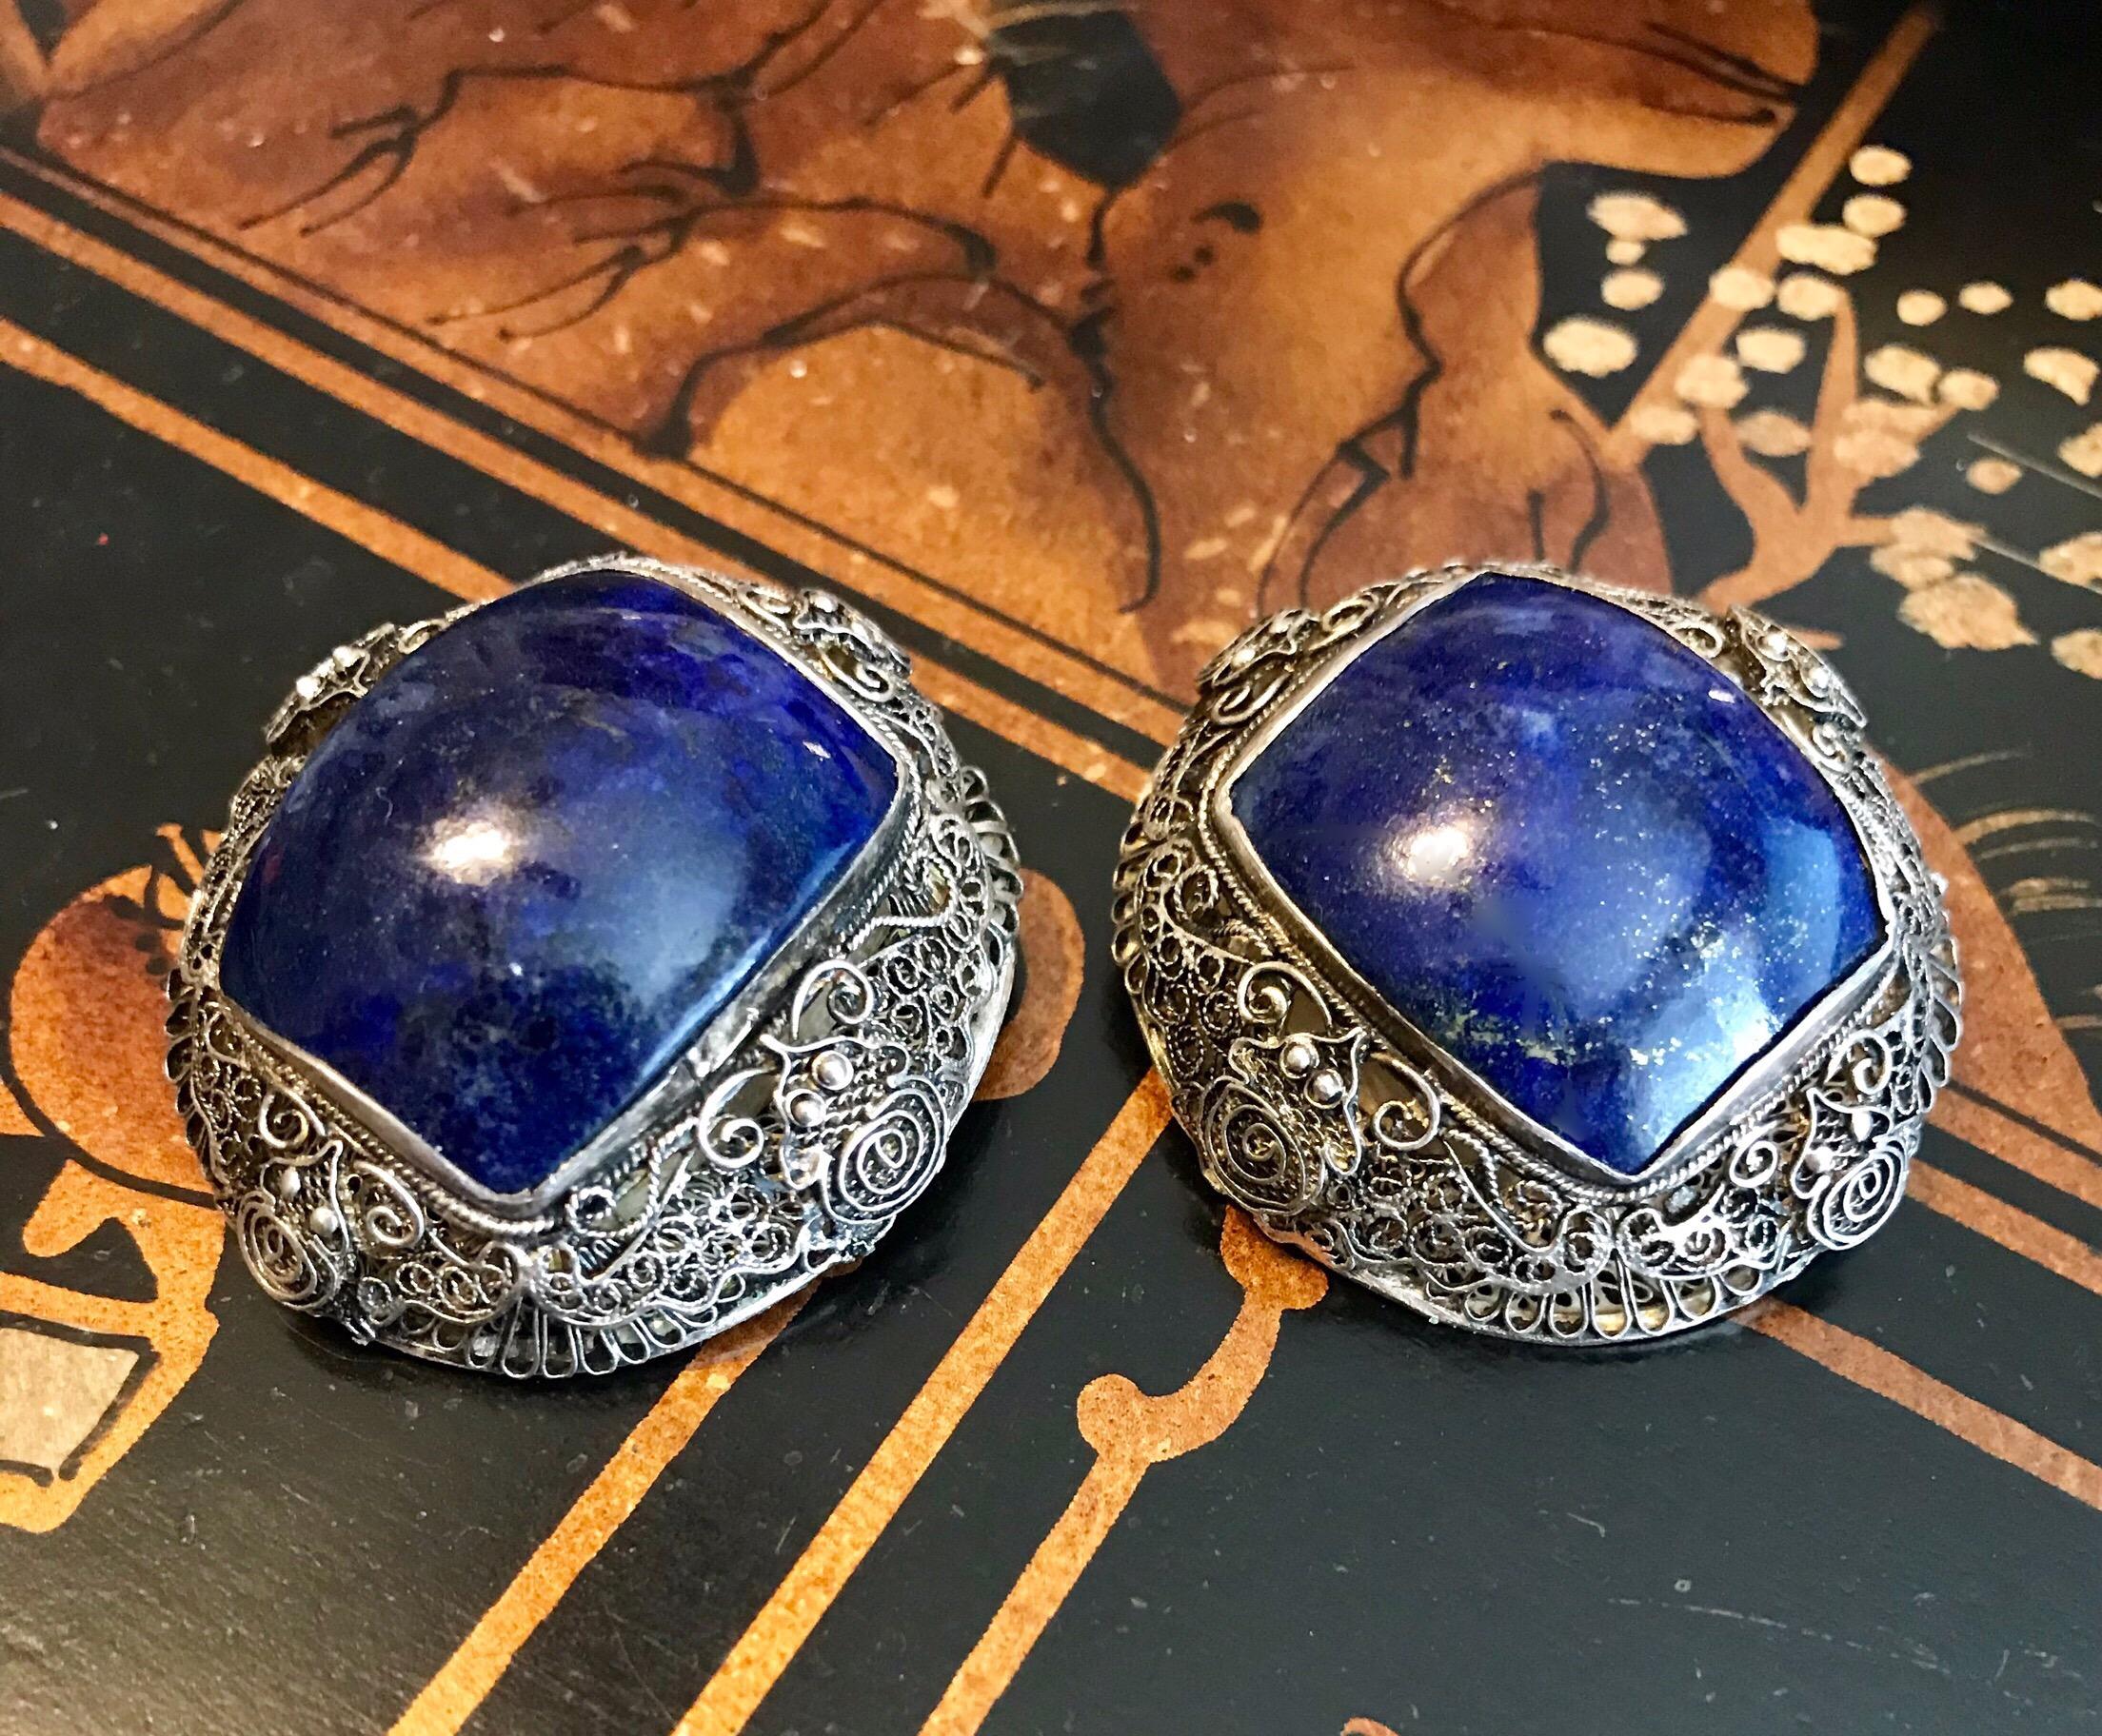 Circa 1940s Chinese Sterling Silver and Lapis Lazuli cabochon clip back earrings.   Beautifully handcrafted sterling filigree earrings with butterfly motifs on all four sides and bezel set with large, rectangular lapis cabochons.  Each earring